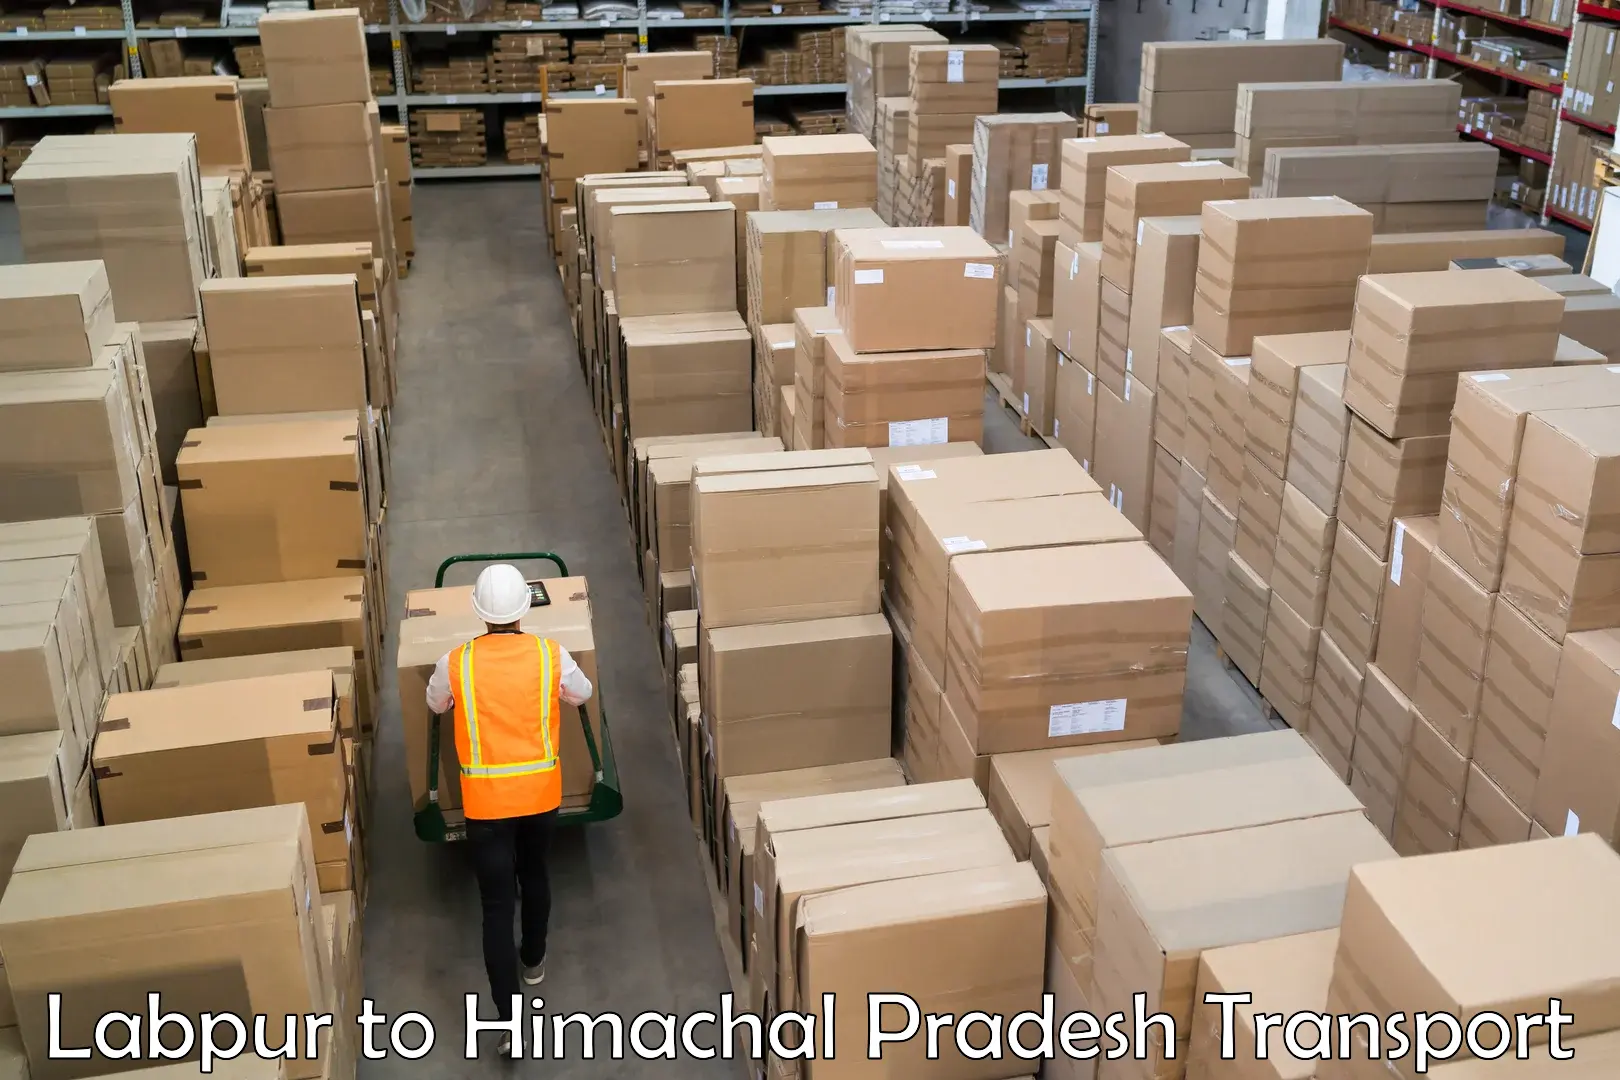 Goods delivery service Labpur to Himachal Pradesh